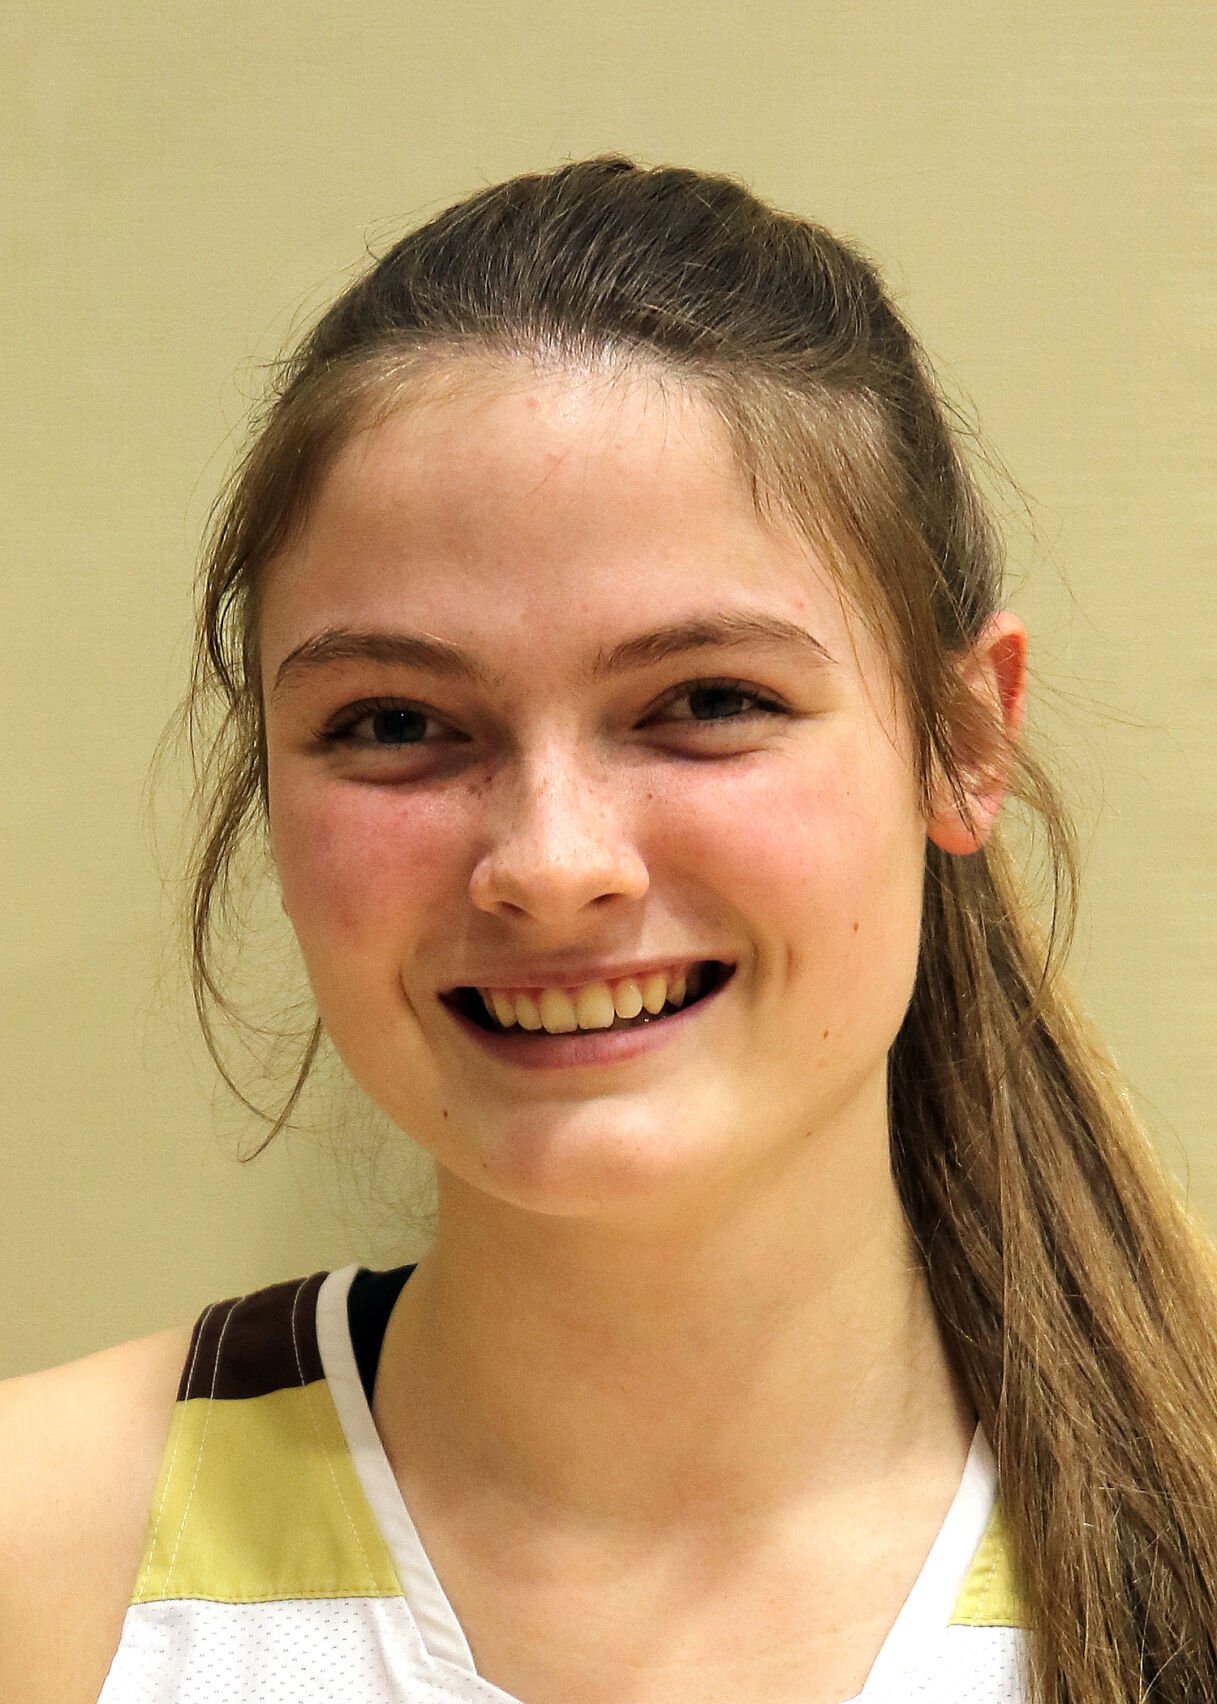 Stonington Girls’ Basketball Team Triumphs over Guilford with 65-57 Victory